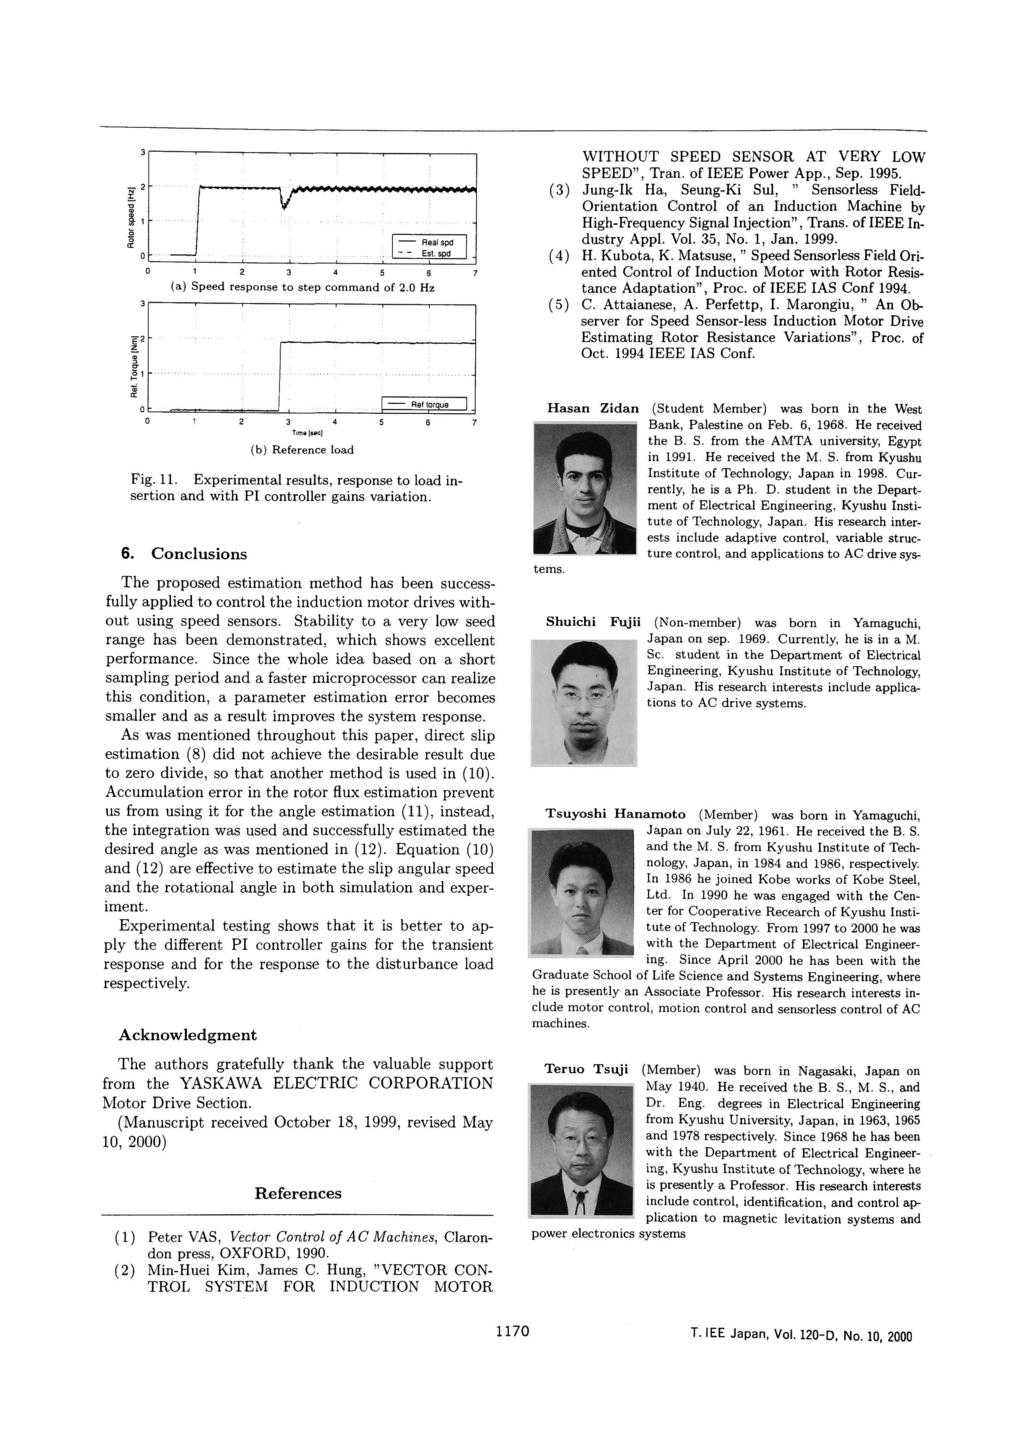 WITHOUT SPEED SENSOR SPEED". Tran. of IEEE Power AT VERY LOW ADD.. Sen. 1995.